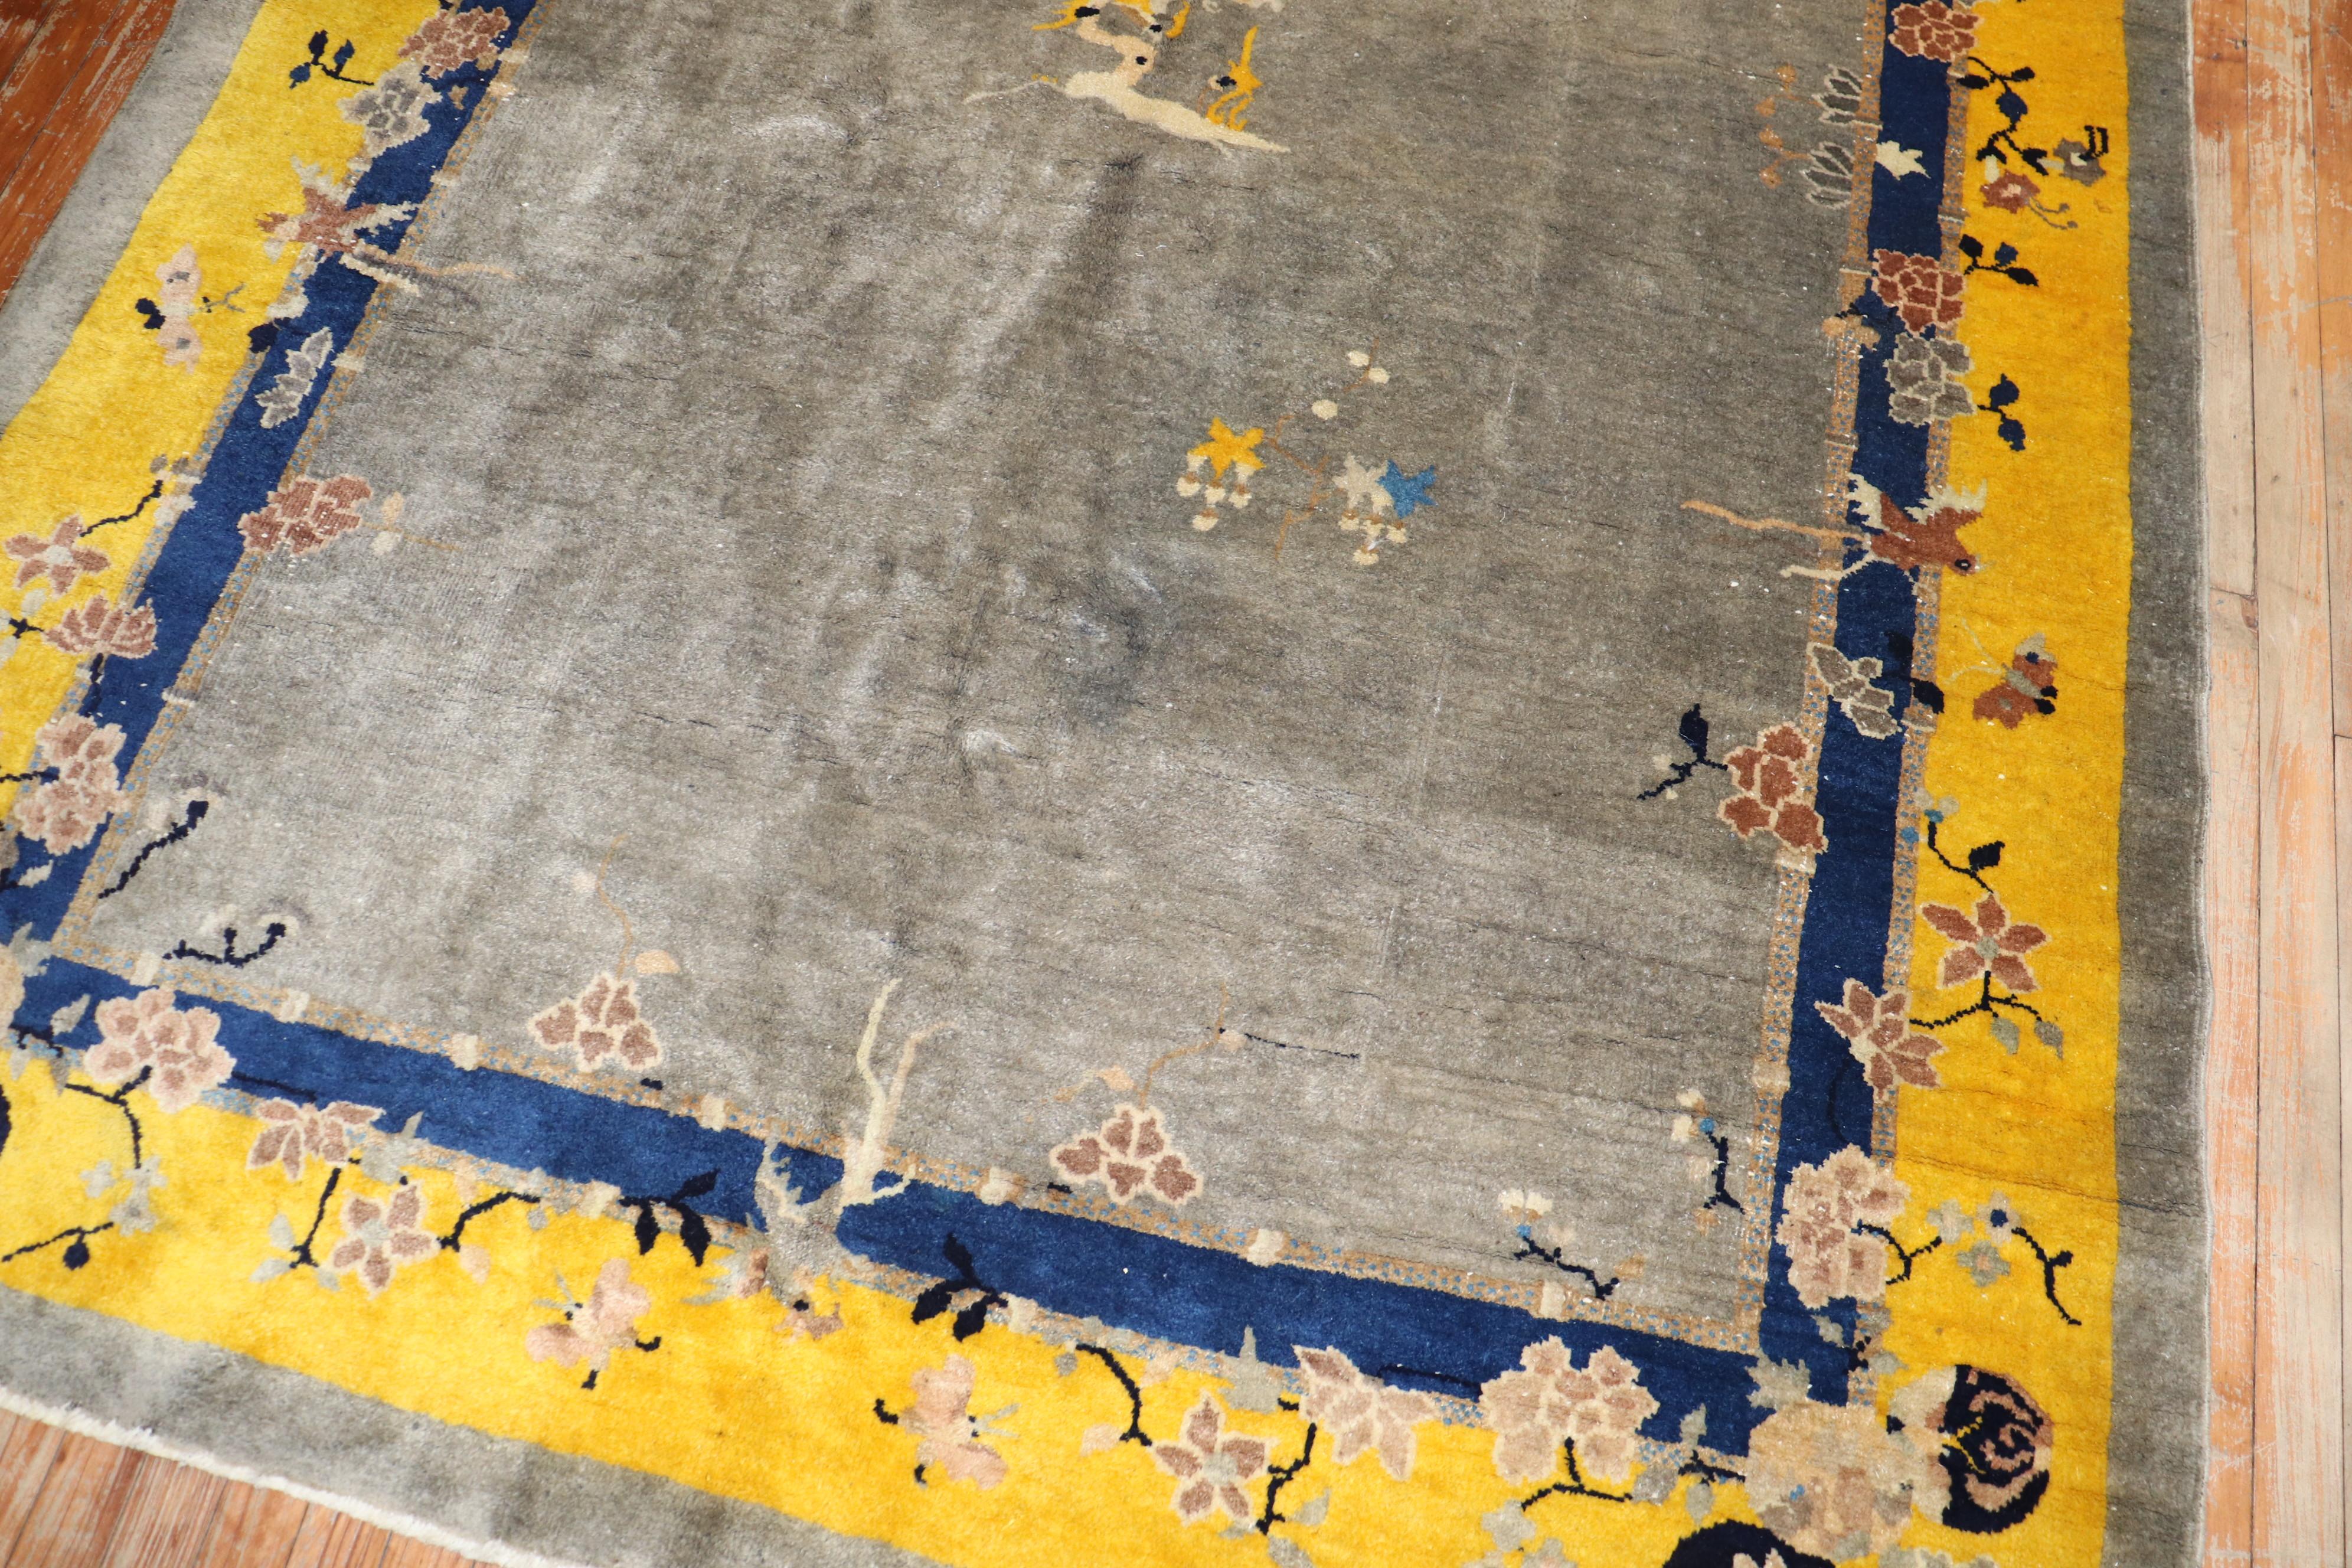 Full Pile Chinese intermediate size rug from the 2nd quarter of the 20th century featuring a bright yellow border and gray field. Very unique colors and in great condition.

Measures: 6' x 8'7''.